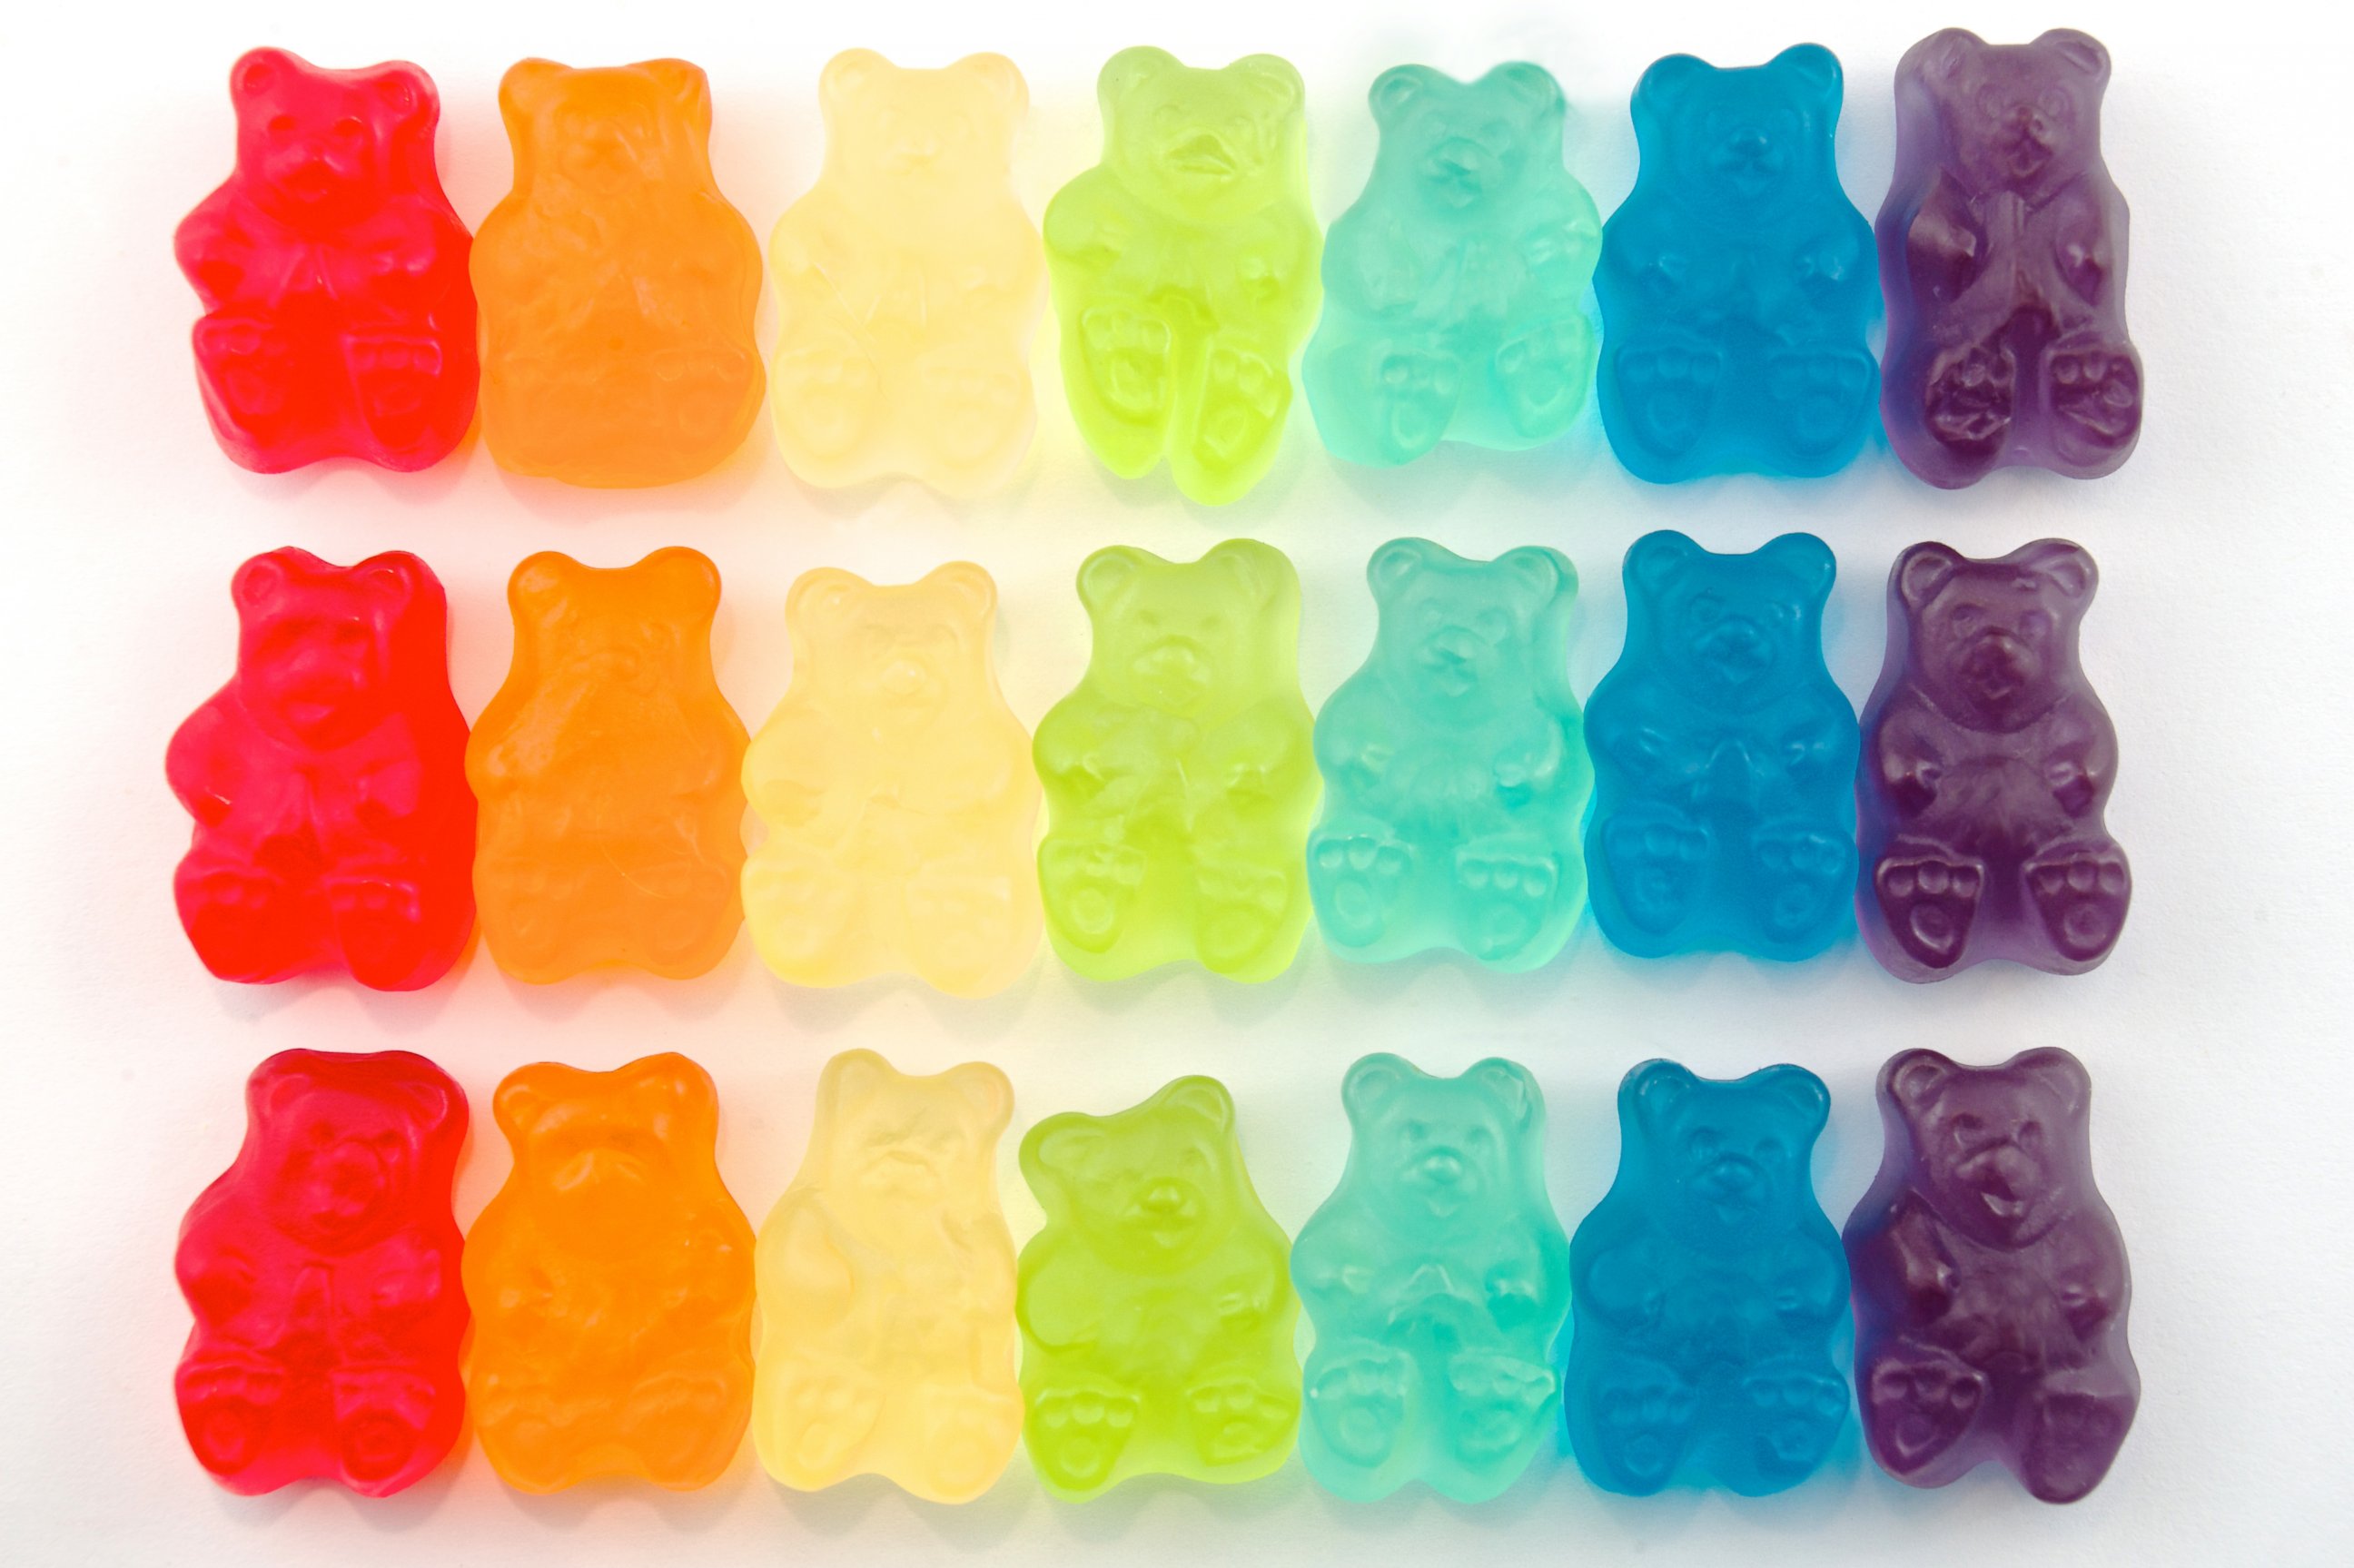 PHOTO: Gummy bears are pictured in this stock image. 